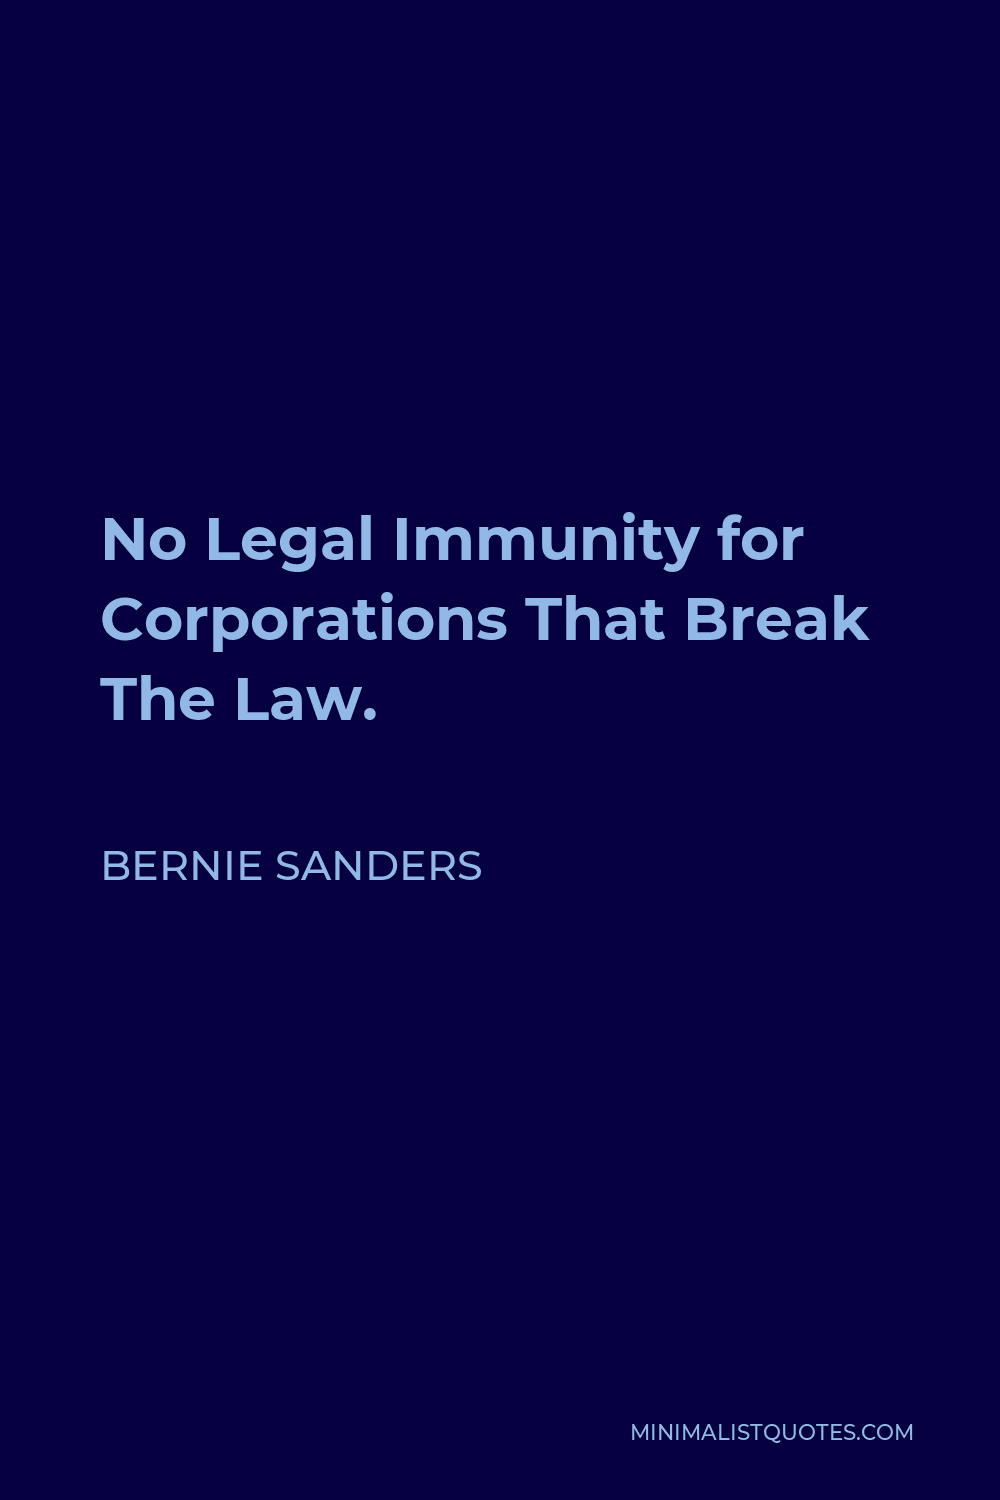 Bernie Sanders Quote - No Legal Immunity for Corporations That Break The Law.